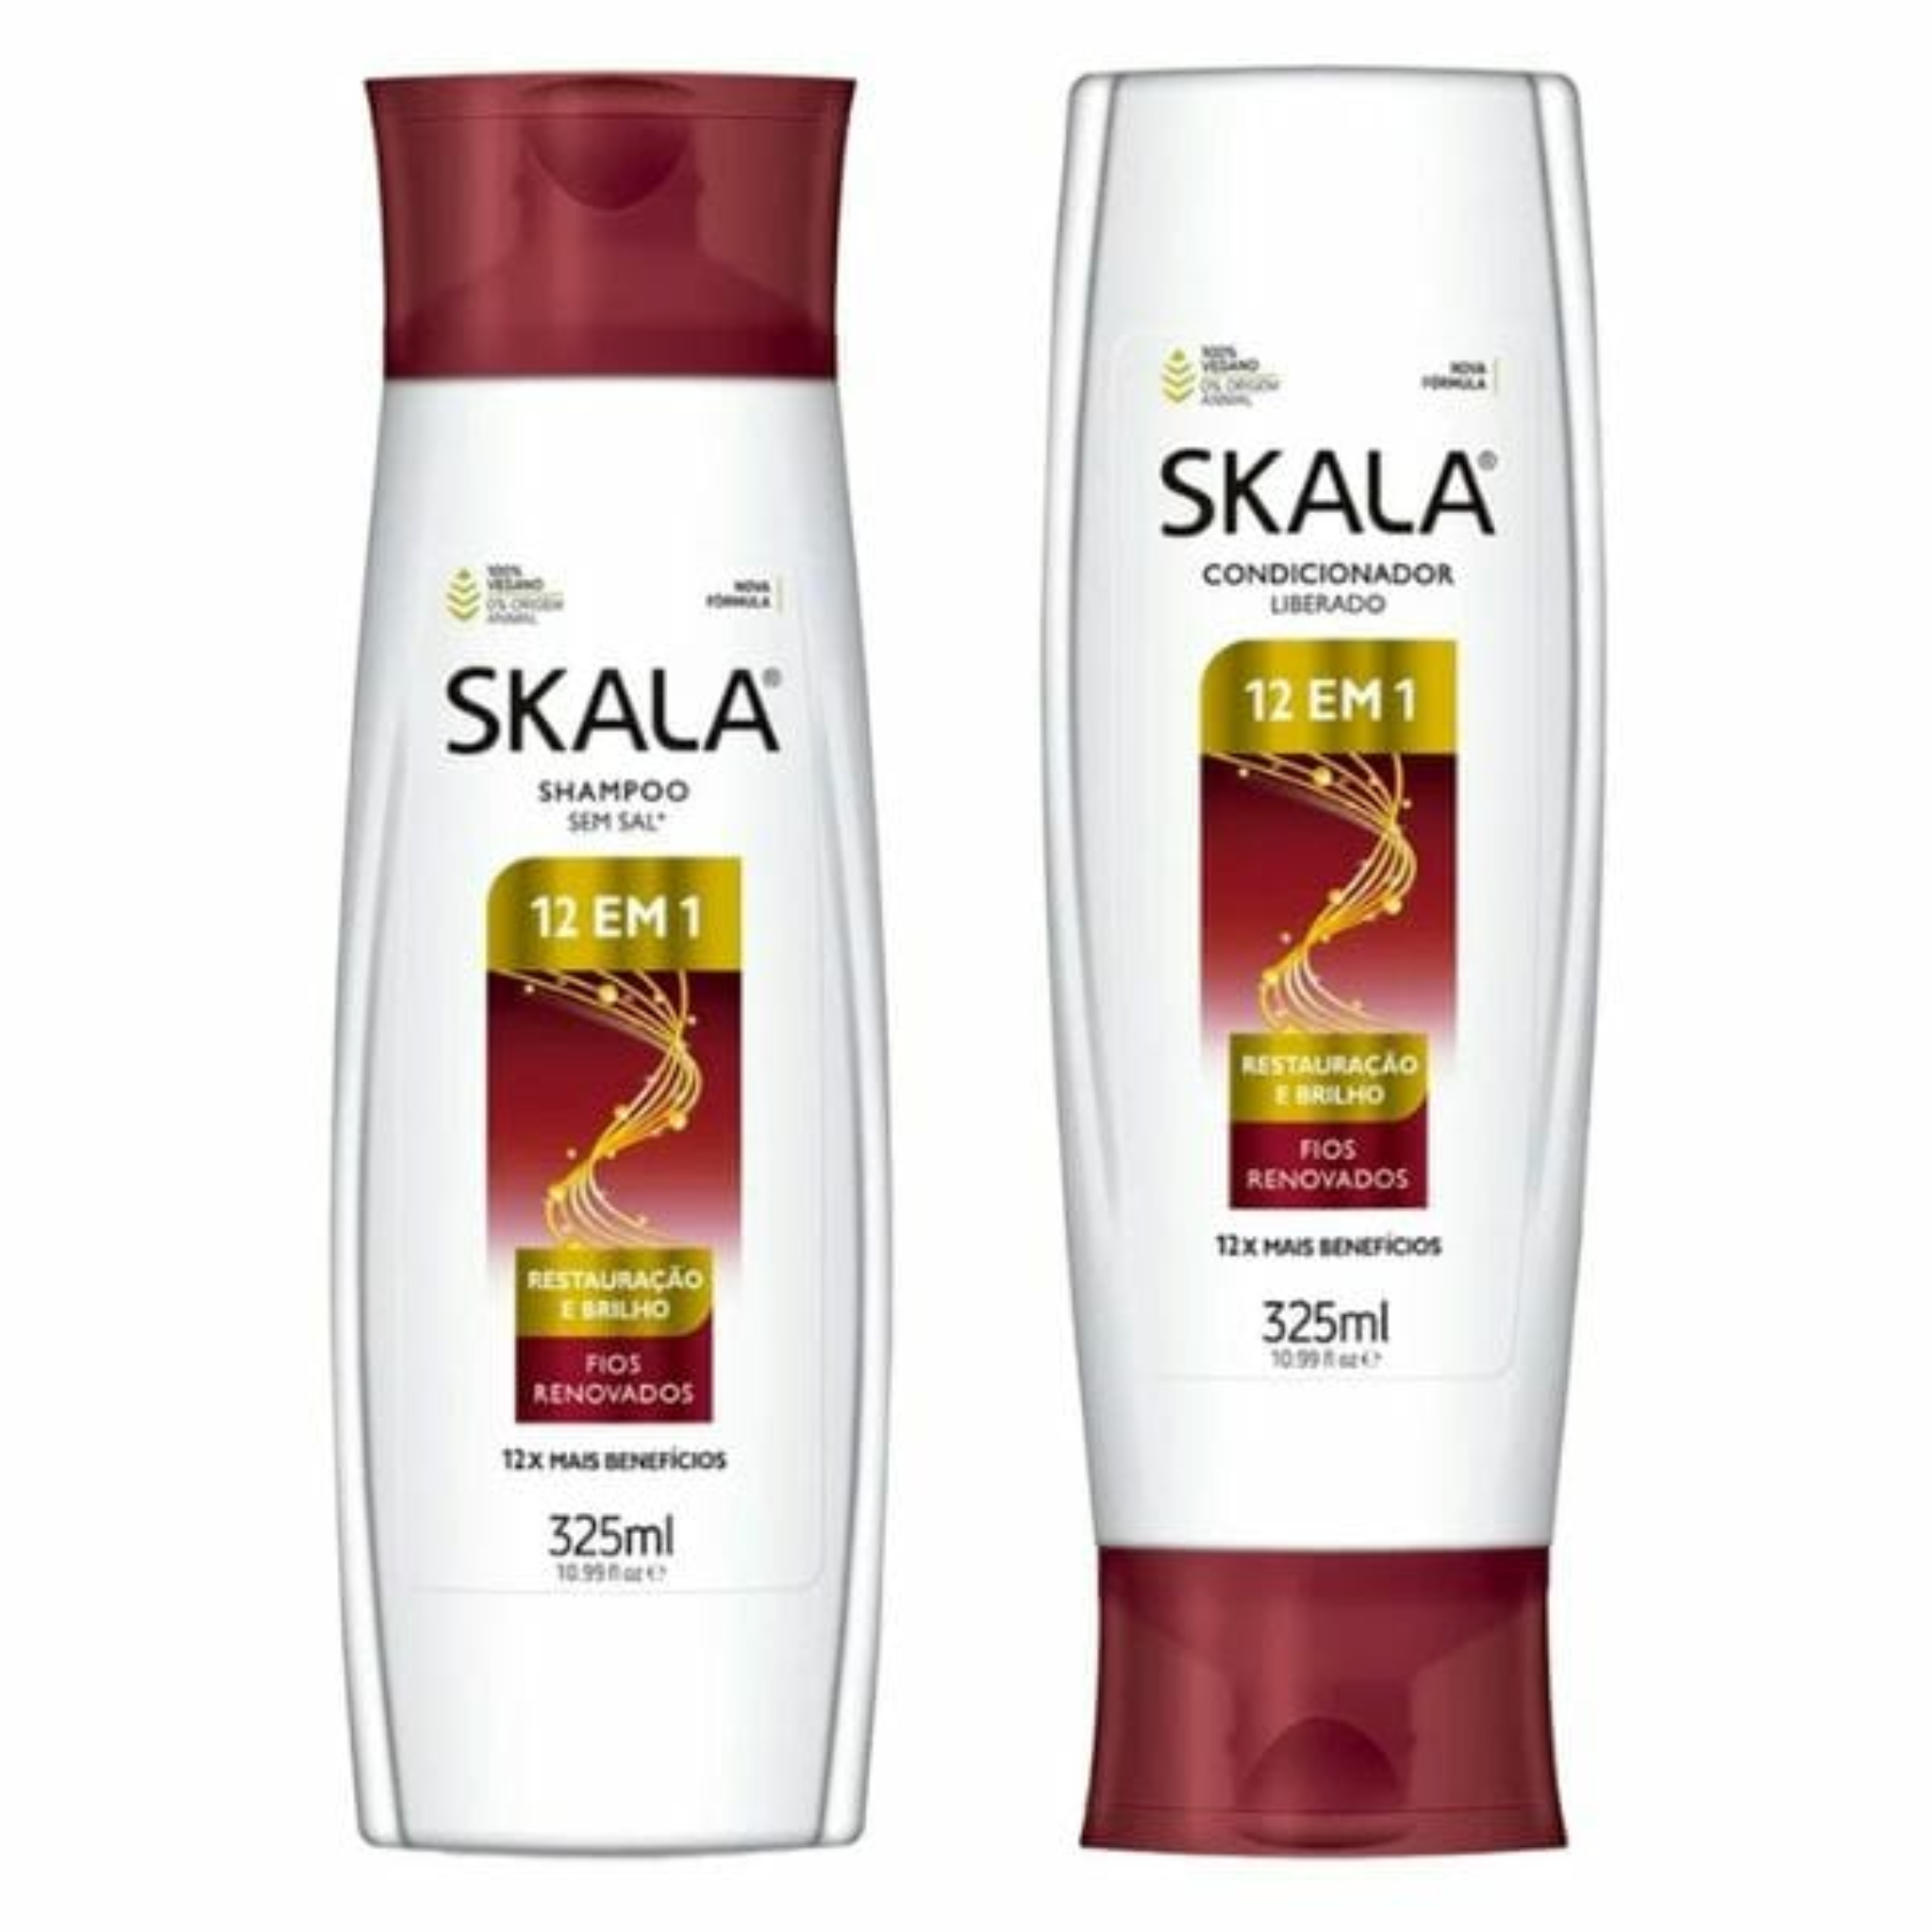 Skala Expert Collection 12 in 1 – Shampoo and Conditioner 2 x 325 ml | 2 x 10.9 oz